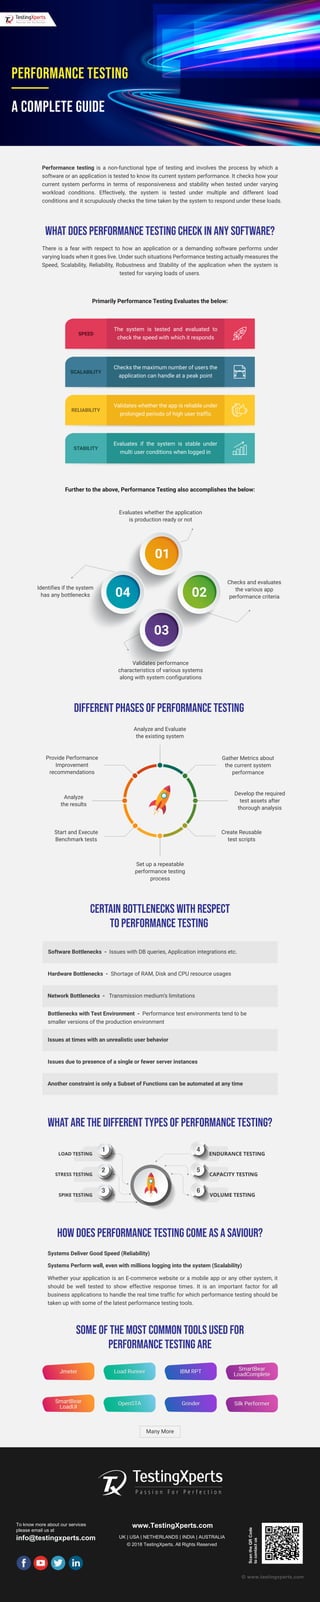 To know more about our services
please email us at
info@testingxperts.com
www.TestingXperts.com
UK | USA | NETHERLANDS | INDIA | AUSTRALIA
© 2018 TestingXperts, All Rights Reserved
ScantheQRCode
tocontactus
© www.testingxperts.com
Performance testing is a non-functional type of testing and involves the process by which a
software or an application is tested to know its current system performance. It checks how your
current system performs in terms of responsiveness and stability when tested under varying
workload conditions. Effectively, the system is tested under multiple and different load
conditions and it scrupulously checks the time taken by the system to respond under these loads.
There is a fear with respect to how an application or a demanding software performs under
varying loads when it goes live. Under such situations Performance testing actually measures the
Speed, Scalability, Reliability, Robustness and Stability of the application when the system is
tested for varying loads of users.
Evaluates whether the application
is production ready or not
Validates performance
characteristics of various systems
along with system configurations
Checks and evaluates
the various app
performance criteria
Analyze and Evaluate
the existing system
Gather Metrics about
the current system
performance
Develop the required
test assets after
thorough analysis
Create Reusable
test scripts
Start and Execute
Benchmark tests
Provide Performance
Improvement
recommendations
Analyze
the results
Set up a repeatable
performance testing
process
Identifies if the system
has any bottlenecks
What Does Performance Testing Check in any Software?
Different Phases of Performance Testing
Certain Bottlenecks with Respect
to Performance Testing
What are the Different Types of Performance Testing?
Some of the Most Common Tools Used for
Performance Testing are
HOW DOES PERFORMANCE TESTING COME AS A SAVIOUR?
Primarily Performance Testing Evaluates the below:
Further to the above, Performance Testing also accomplishes the below:
Performance Testing
A Complete Guide
Software Bottlenecks - Issues with DB queries, Application integrations etc.
Hardware Bottlenecks - Shortage of RAM, Disk and CPU resource usages
Network Bottlenecks - Transmission medium’s limitations
Bottlenecks with Test Environment - Performance test environments tend to be
smaller versions of the production environment
Issues at times with an unrealistic user behavior
Another constraint is only a Subset of Functions can be automated at any time
Systems Deliver Good Speed (Reliability)
Systems Perform well, even with millions logging into the system (Scalability)
Whether your application is an E-commerce website or a mobile app or any other system, it
should be well tested to show effective response times. It is an important factor for all
business applications to handle the real time traffic for which performance testing should be
taken up with some of the latest performance testing tools.
Issues due to presence of a single or fewer server instances
Jmeter
SmartBear
LoadUI
Load Runner
OpenSTA
IBM RPT
Grinder Silk Performer
SmartBear
LoadComplete
Many More
 